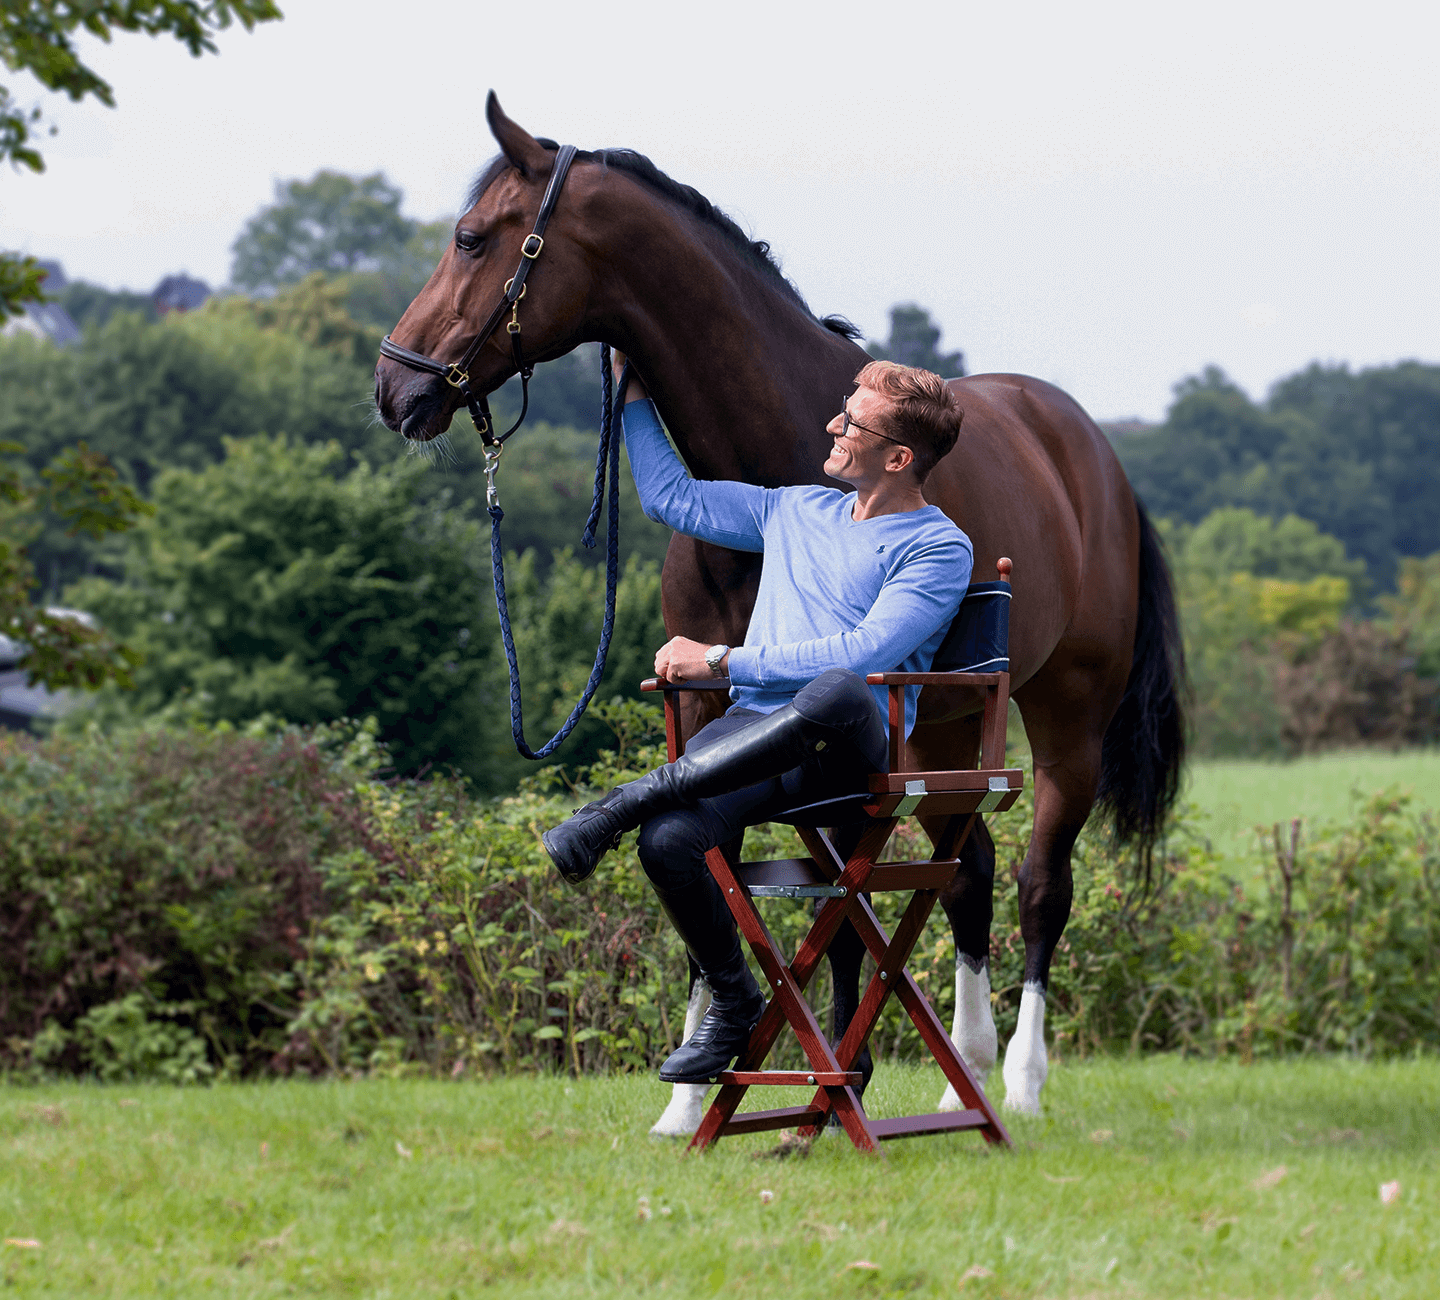 Discover your perfect equine partner with Jens Wawrauschek Horses!